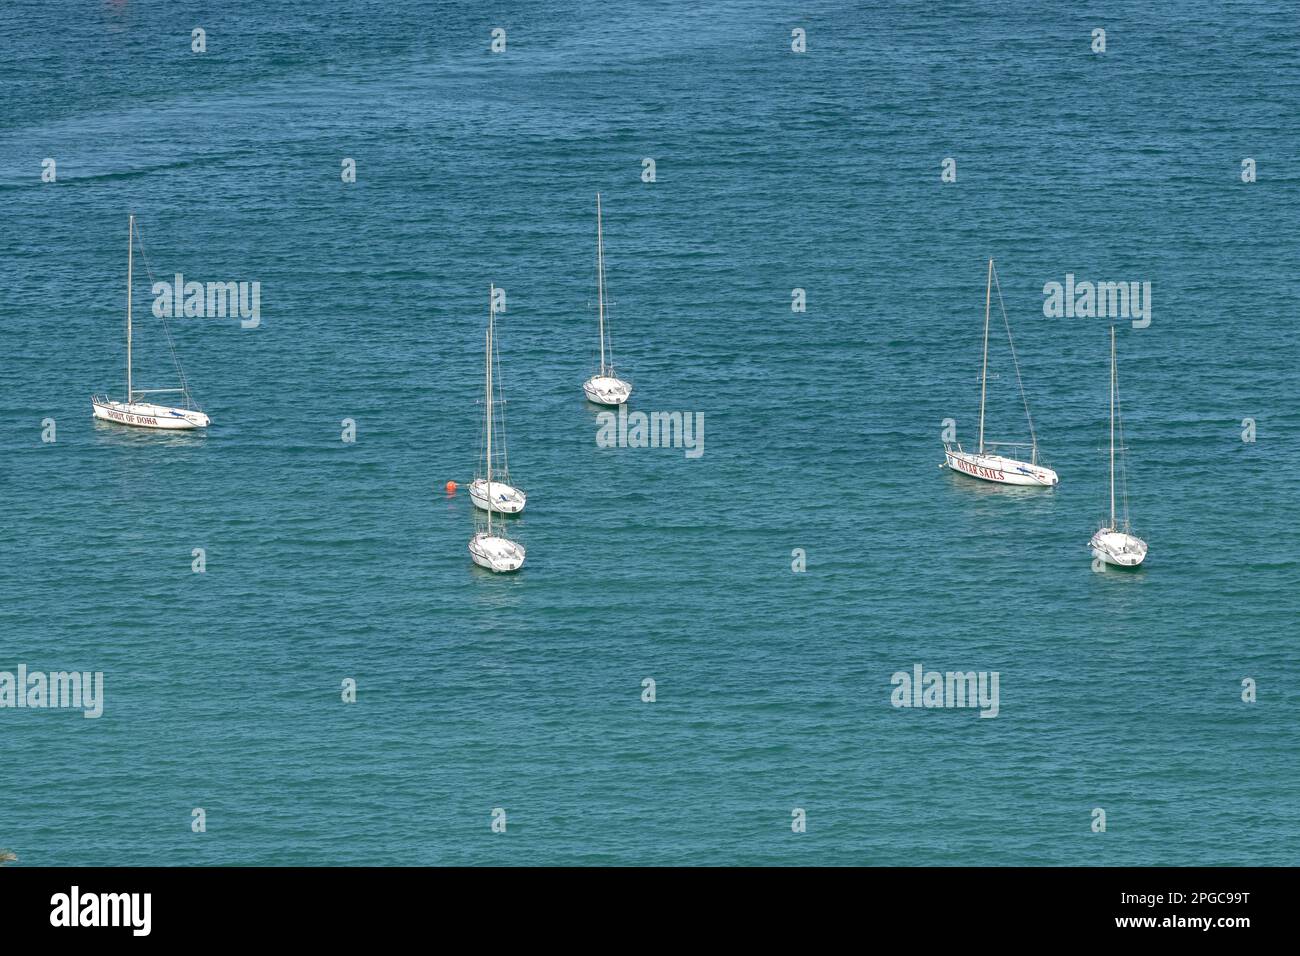 Aerial view of a white yacht with a sail. Ship in the blue sea Corniche beach Doha Stock Photo